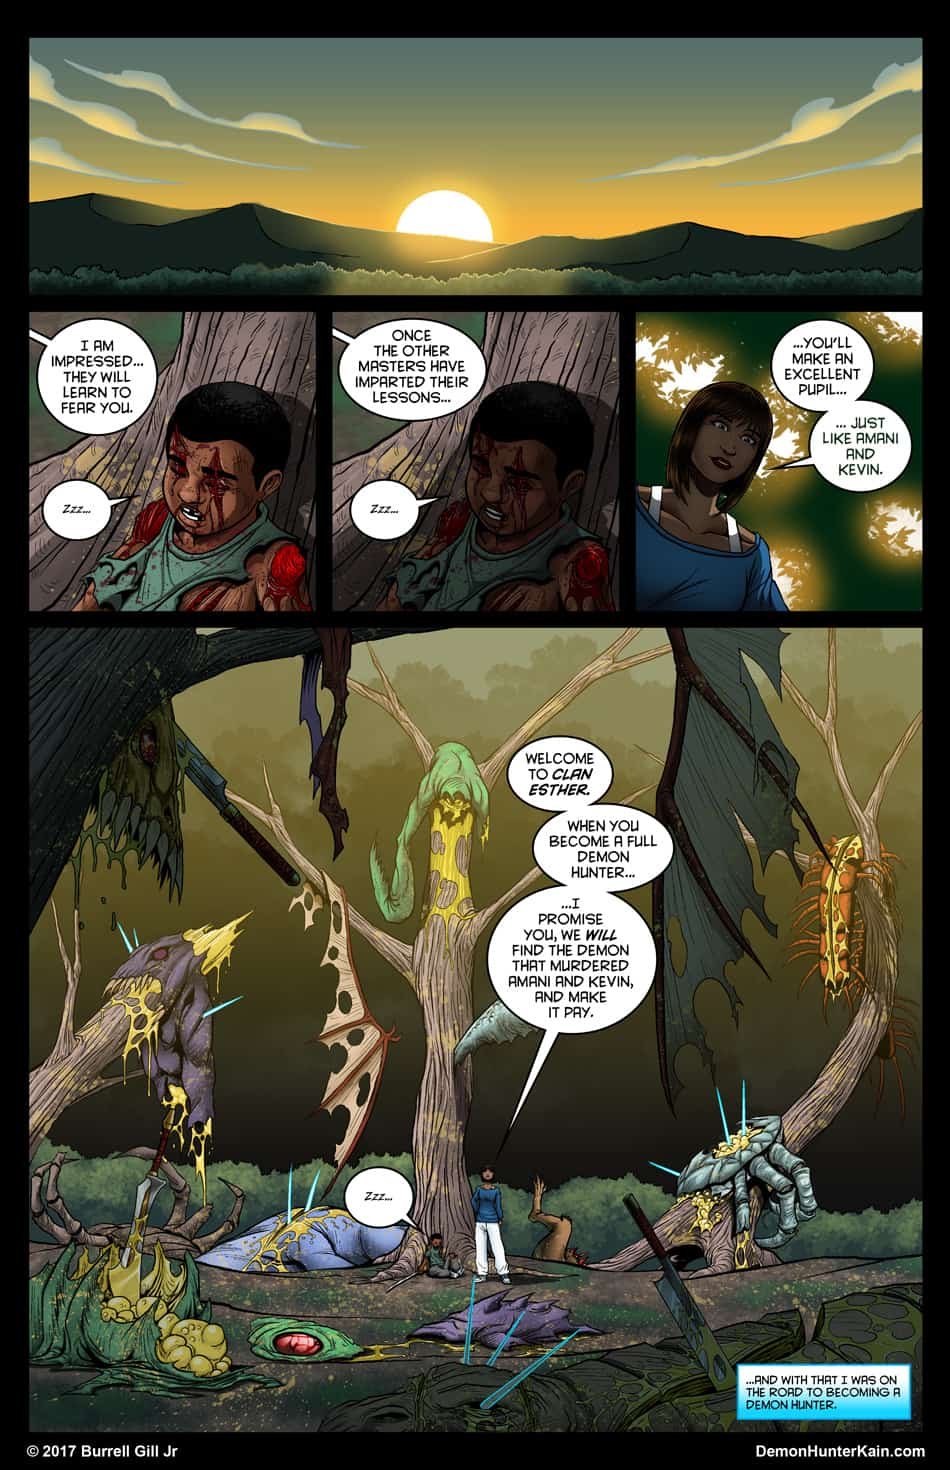 Demon Hunter Kain Chapter 6: The Boy Called Kain, Page 94.